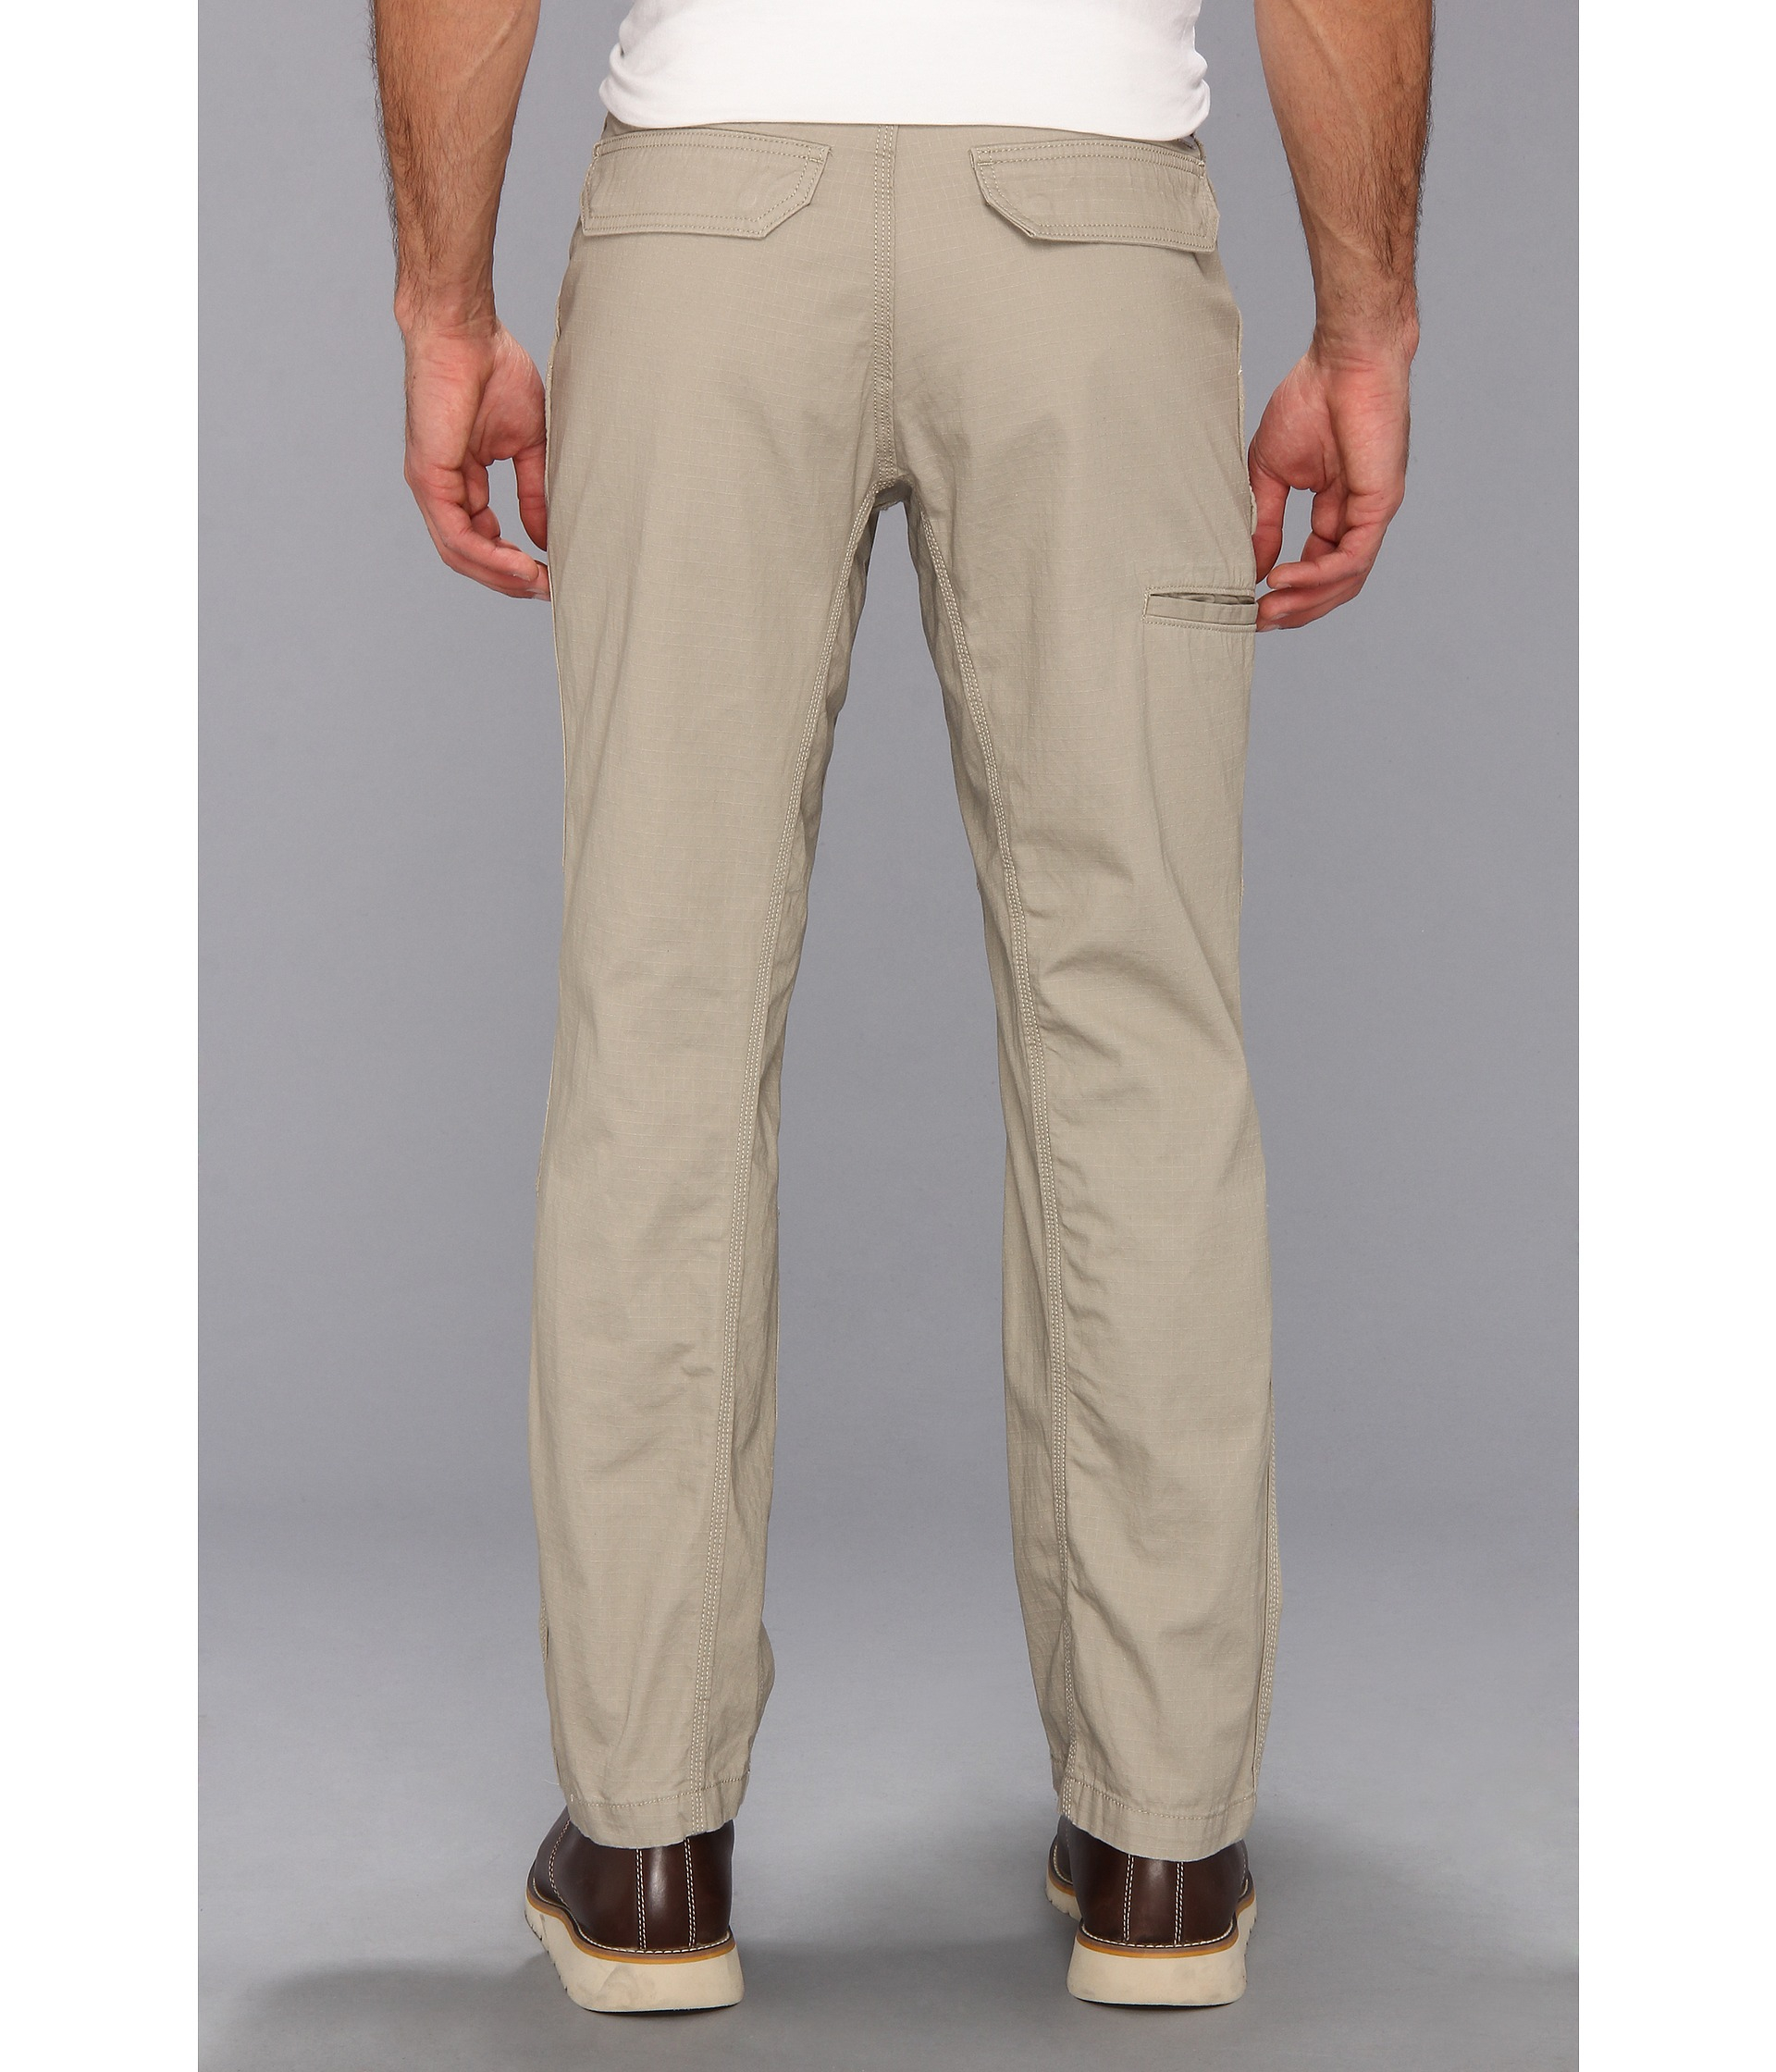 Carhartt Cotton Tacoma Ripstop Pant in Tan (Brown) for Men - Lyst